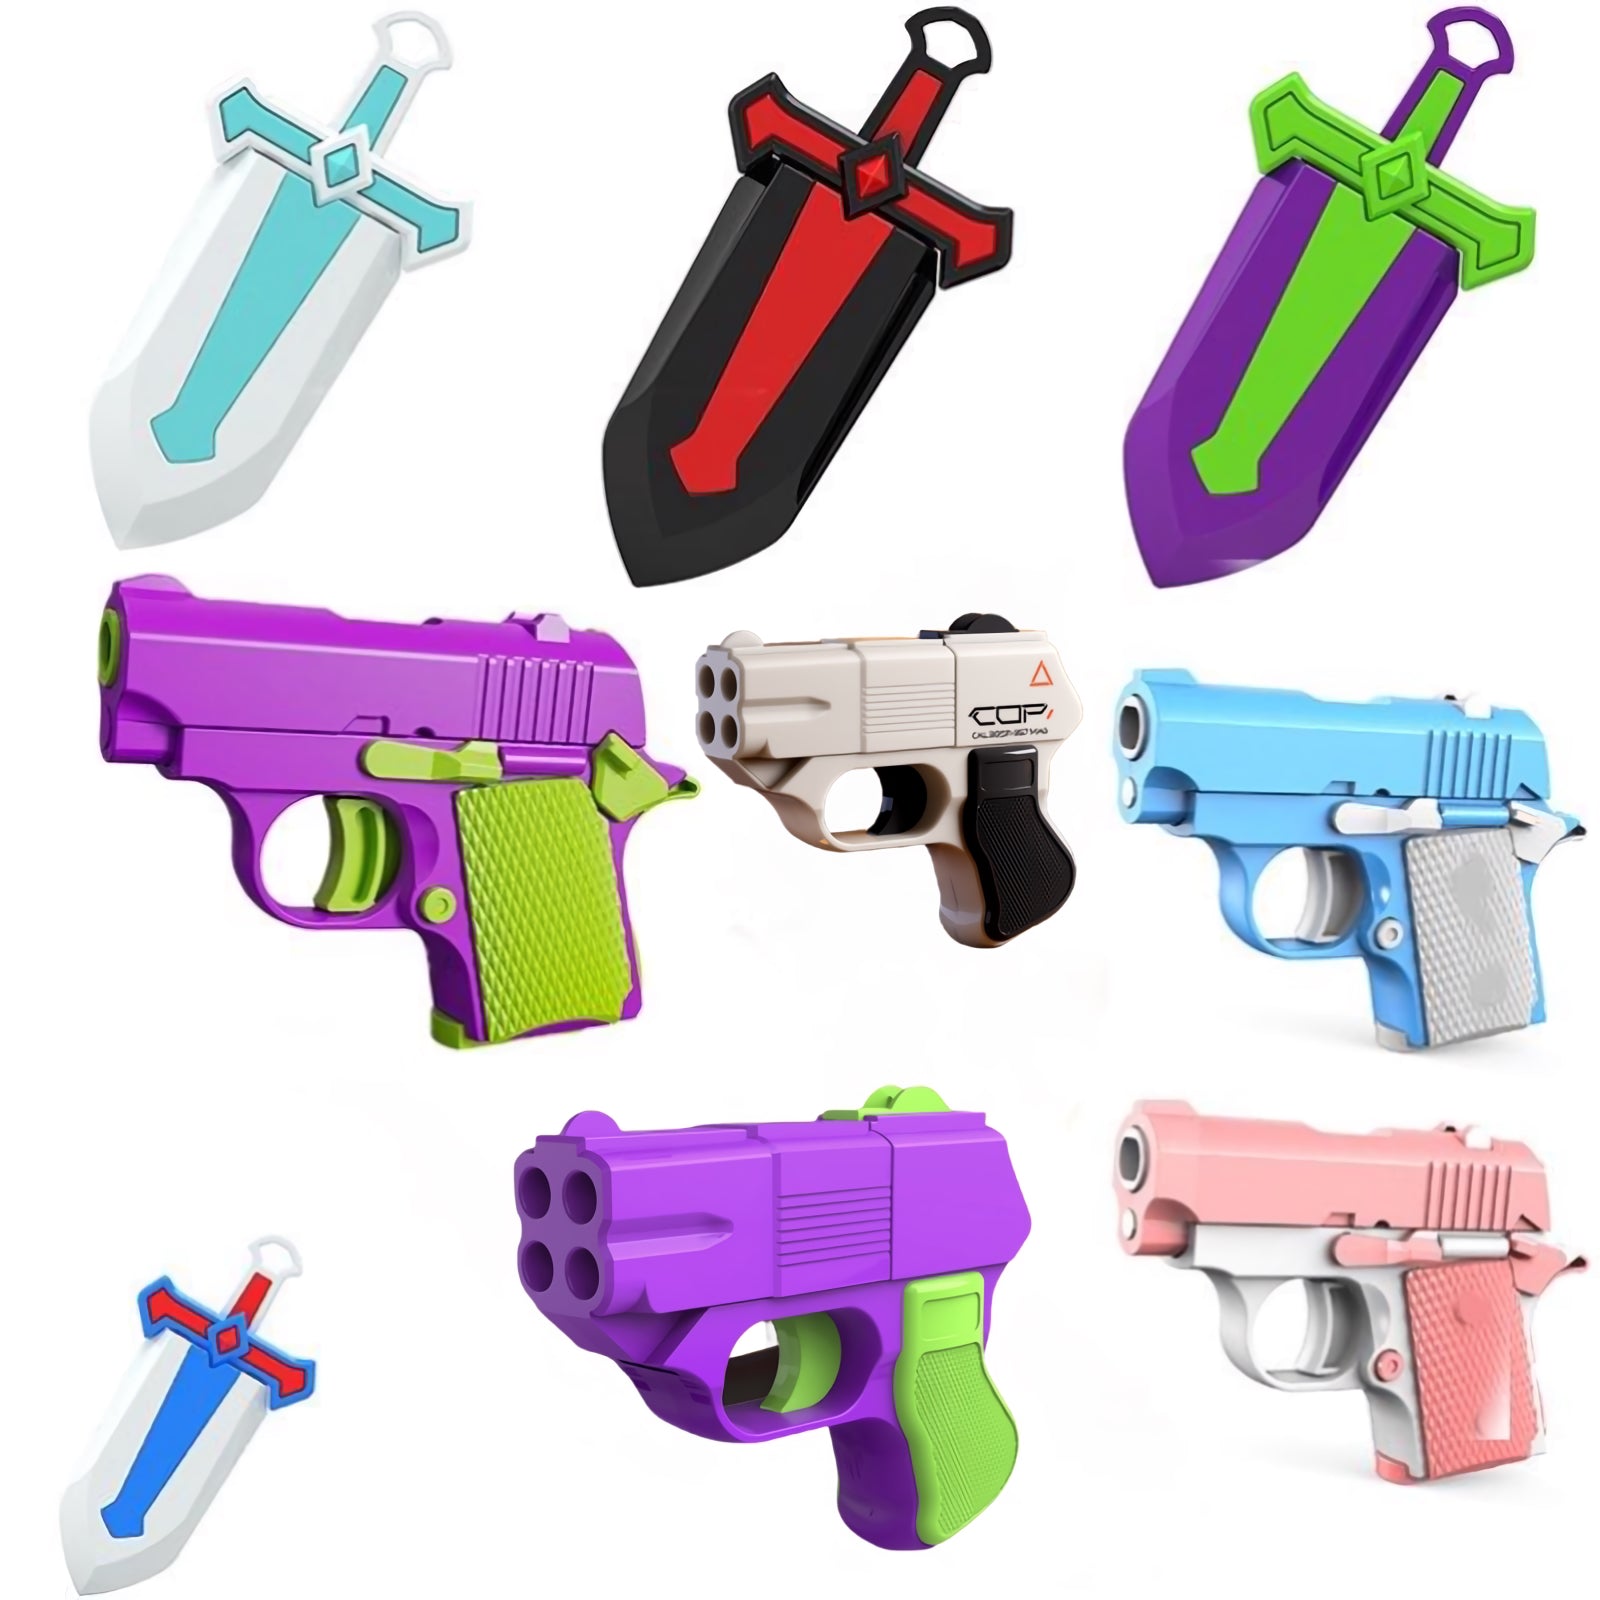  Fidget Toys Adults,1911 3D Printed Small Pistol Toys, Stress  Relief Pistol Toys for Adults, Suitable for Relieving ADHD, Anxiety,  Suitable Toys for Adults and Kids, Best Gift for Friends(Red&Yellow) : Toys